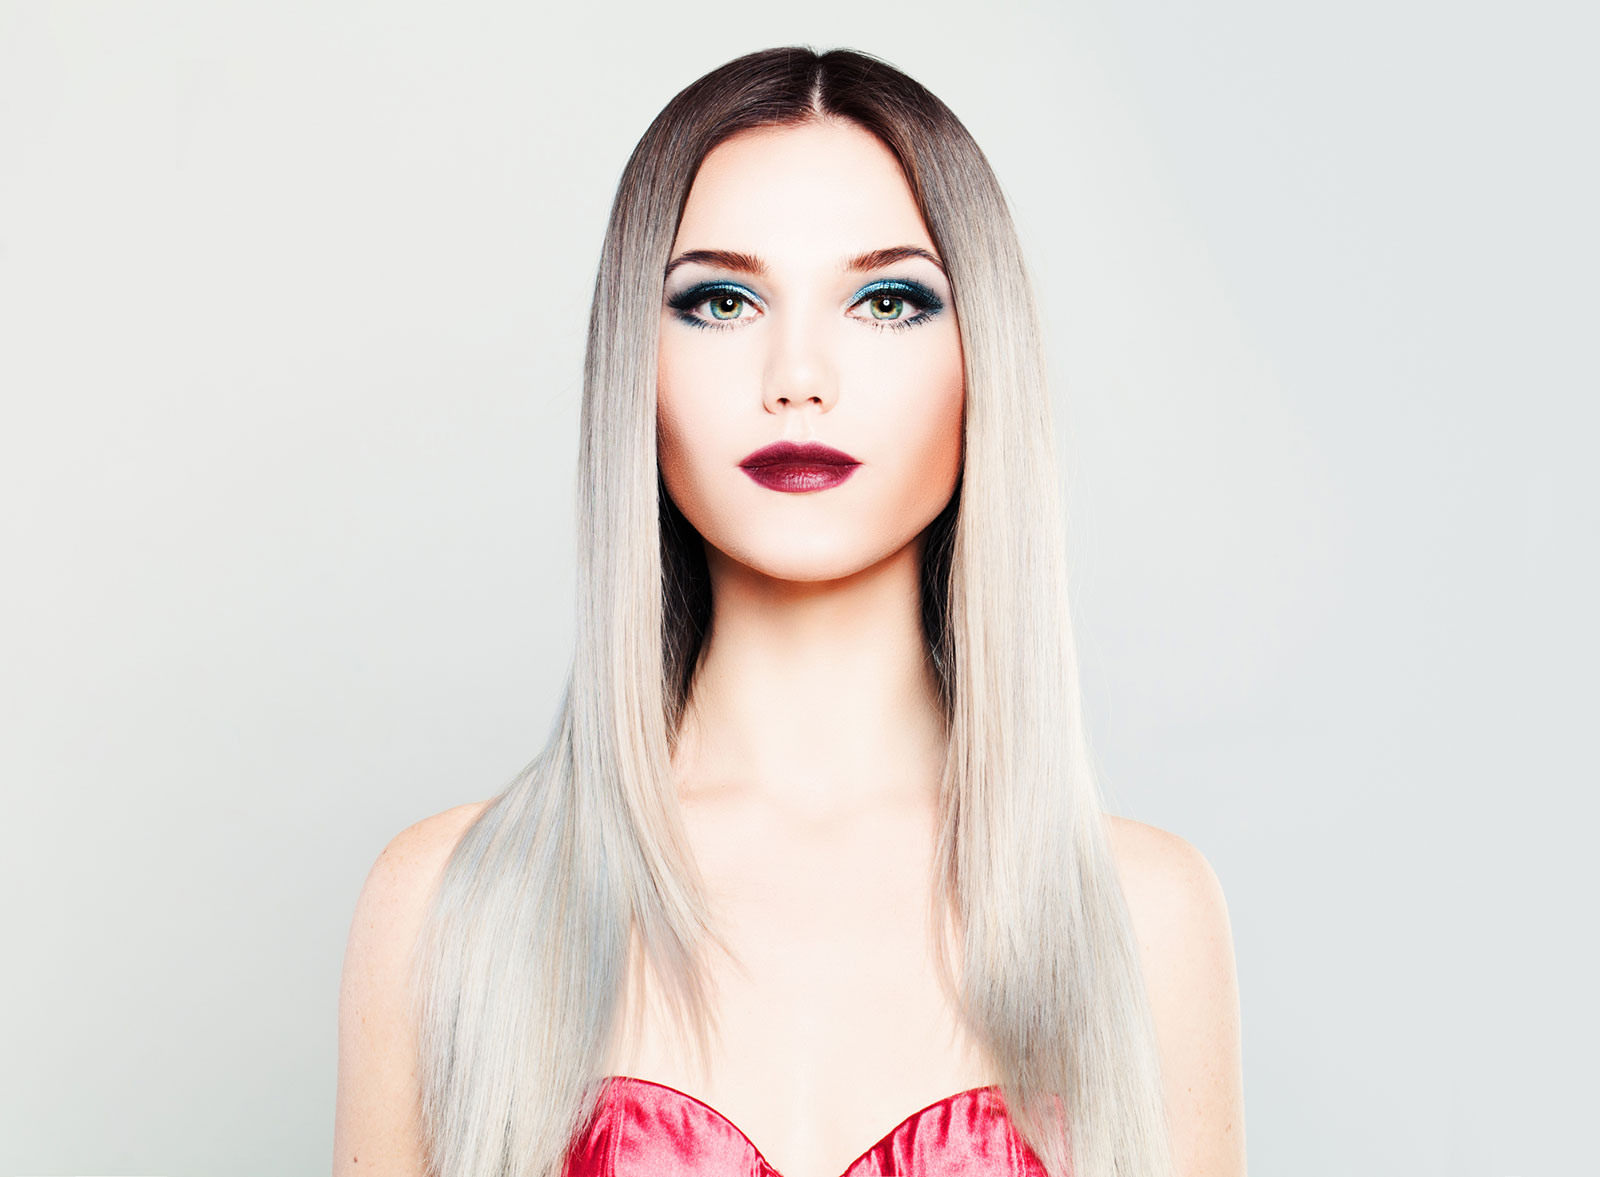 The bevelled and bold White ombre hair